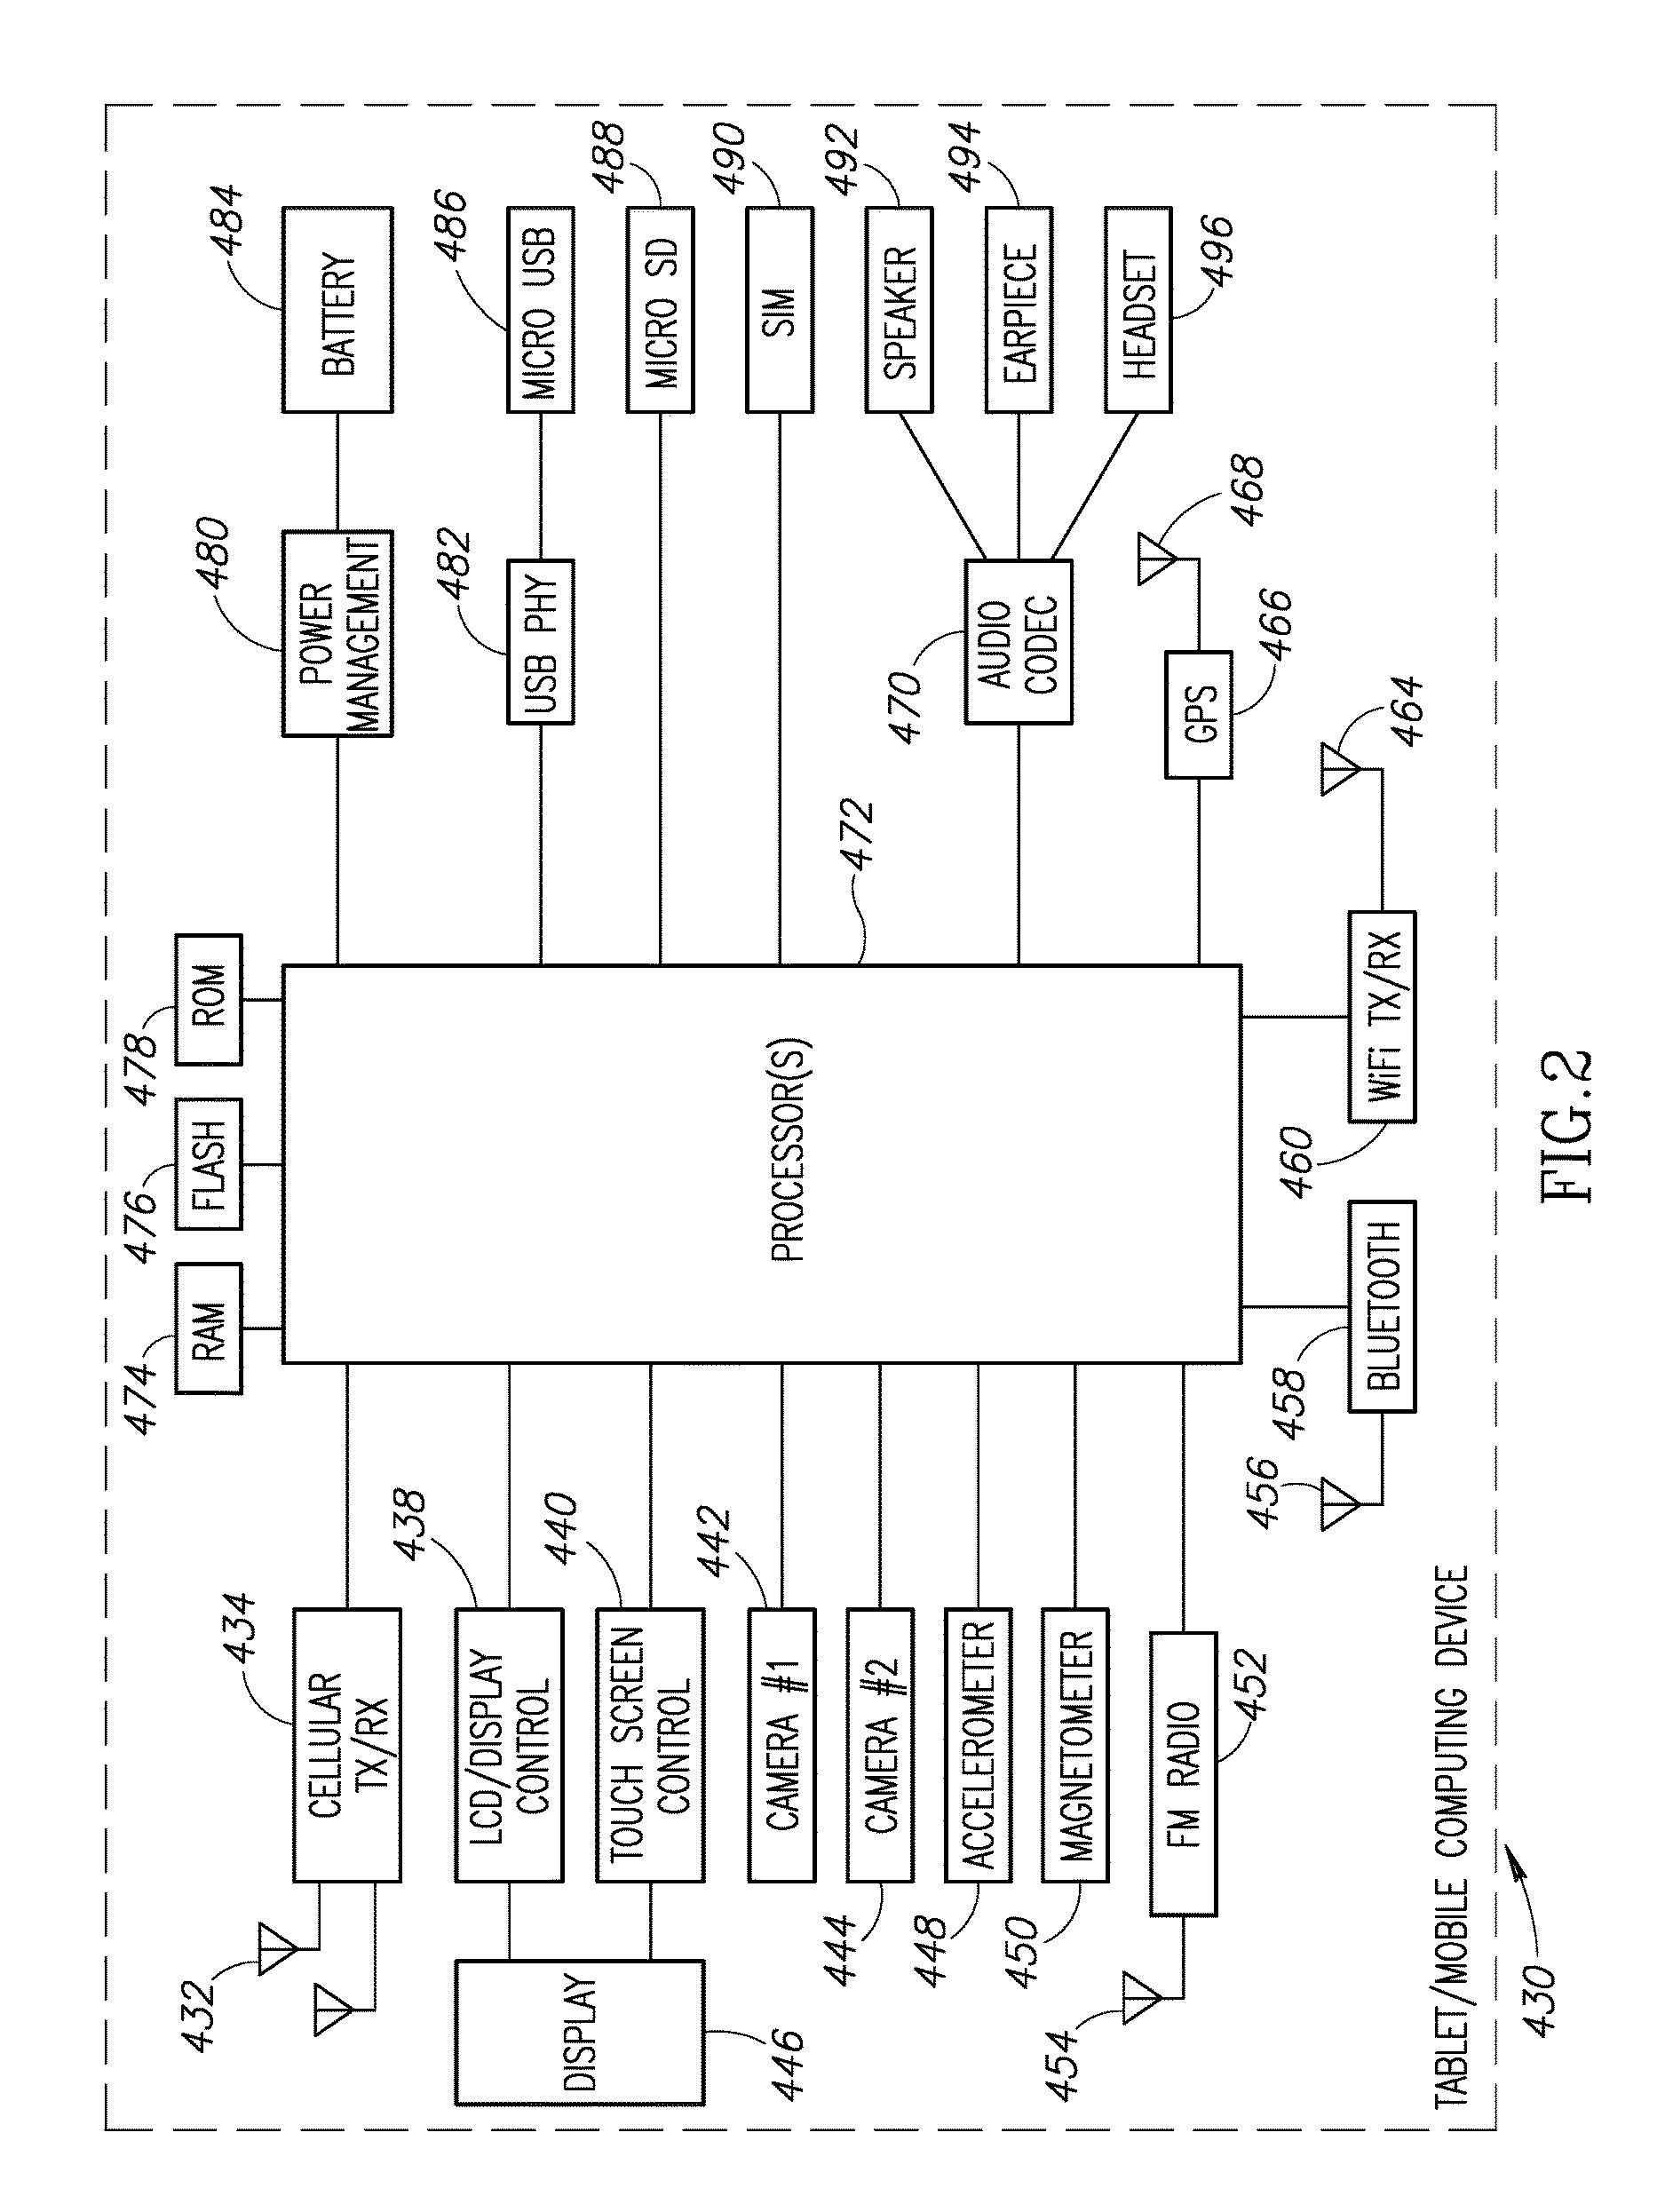 System And Method Of User Identity Validation in a Telemedicine System